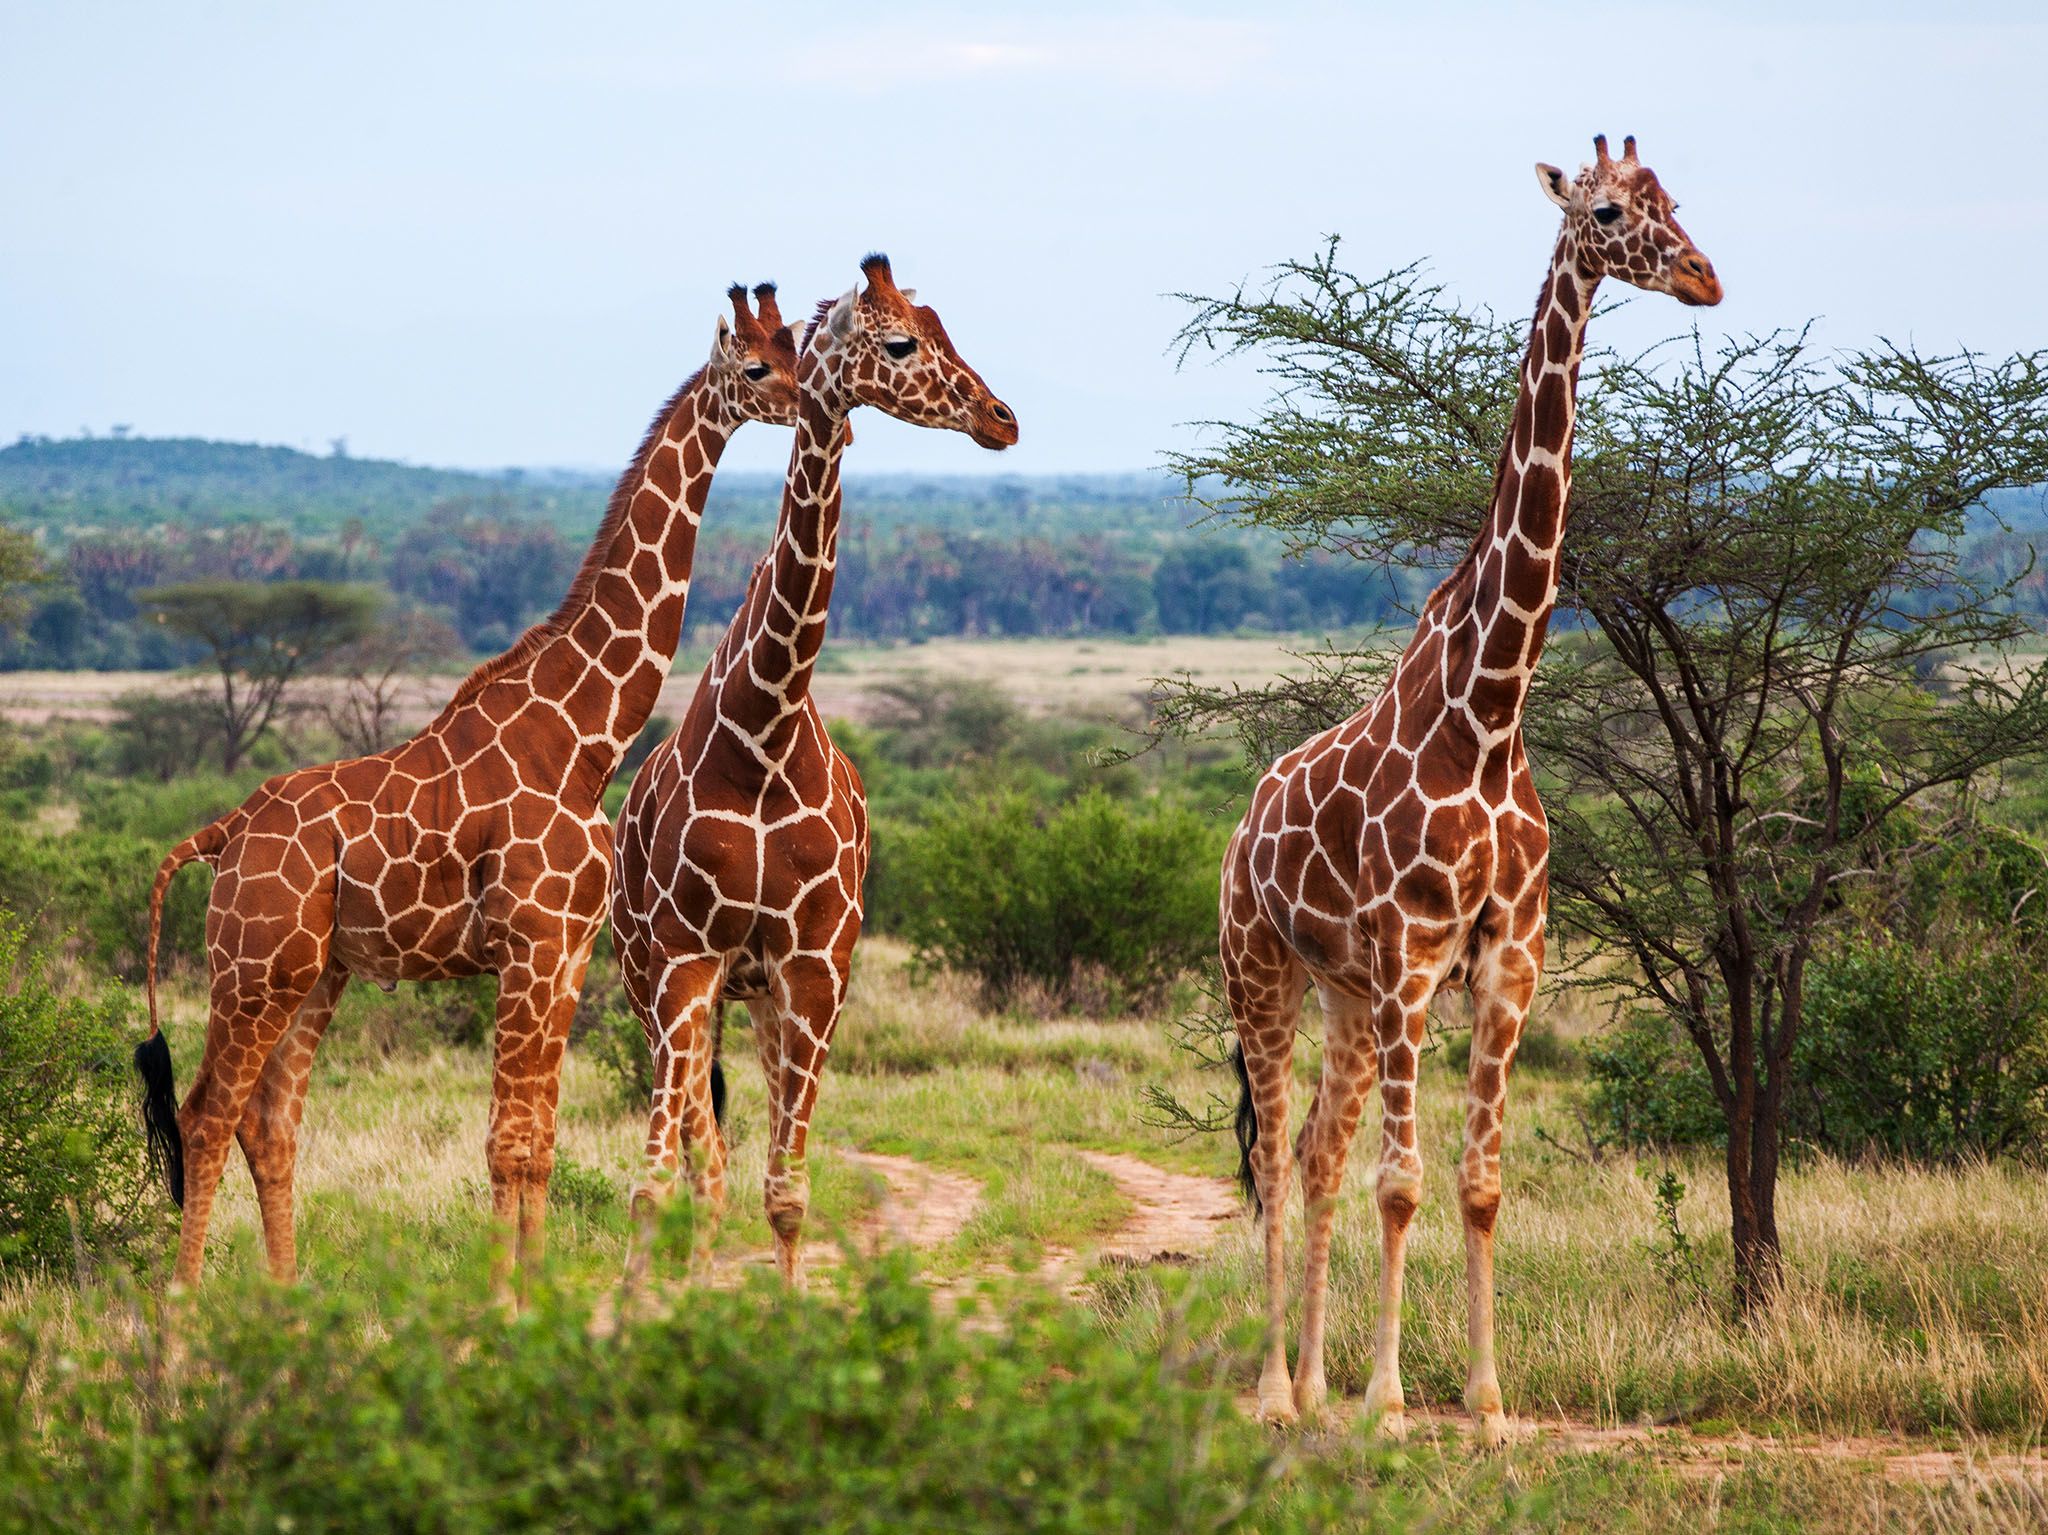 Kenya, Africa:  Small herd of giraffes in Kenya. This image is from Survive The Wild. [Photo of the day - June 2017]